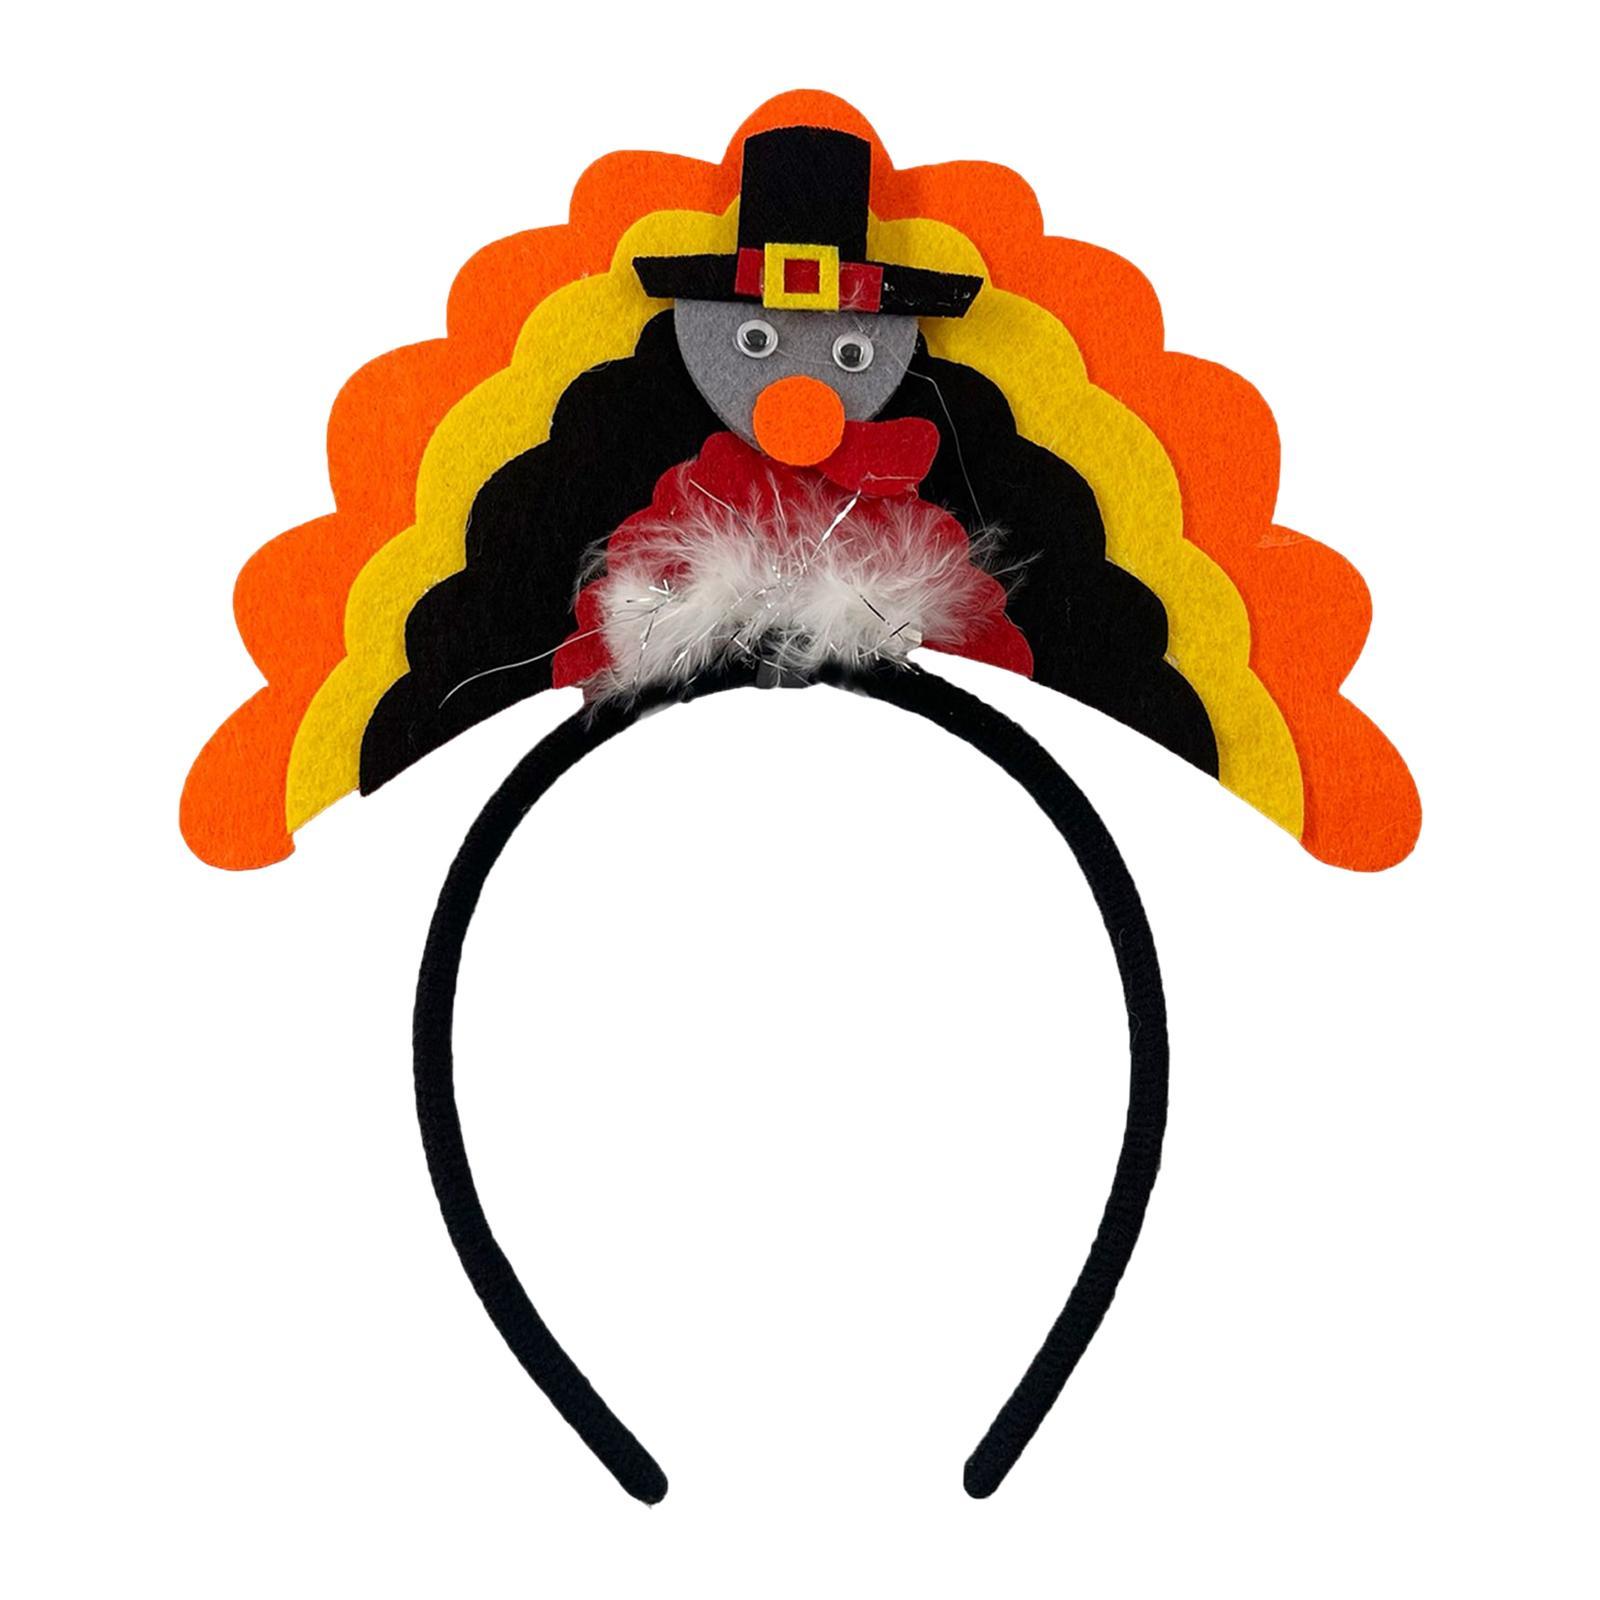 Cute Turkey Headband, Accessories, for Thanksgiving Costume Party Halloween Cosplay